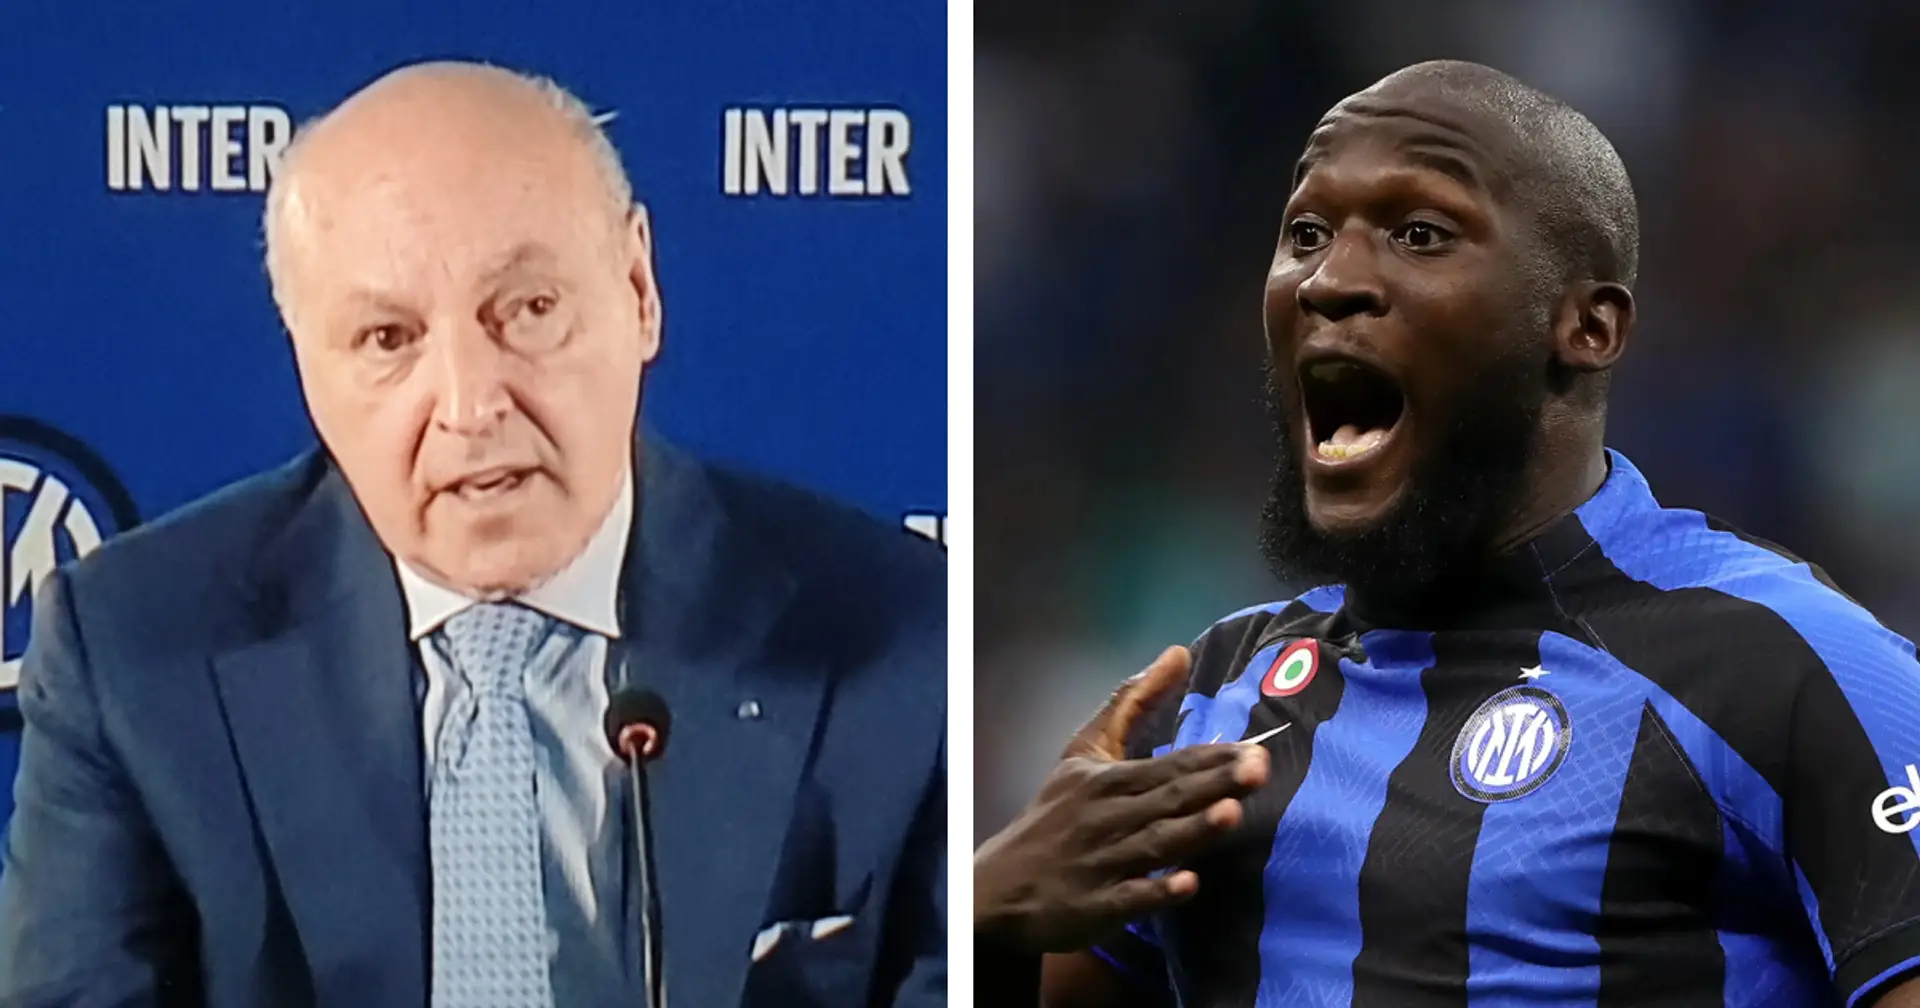 'They can’t expect large fees': Inter CEO sends Chelsea message amid Lukaku talks